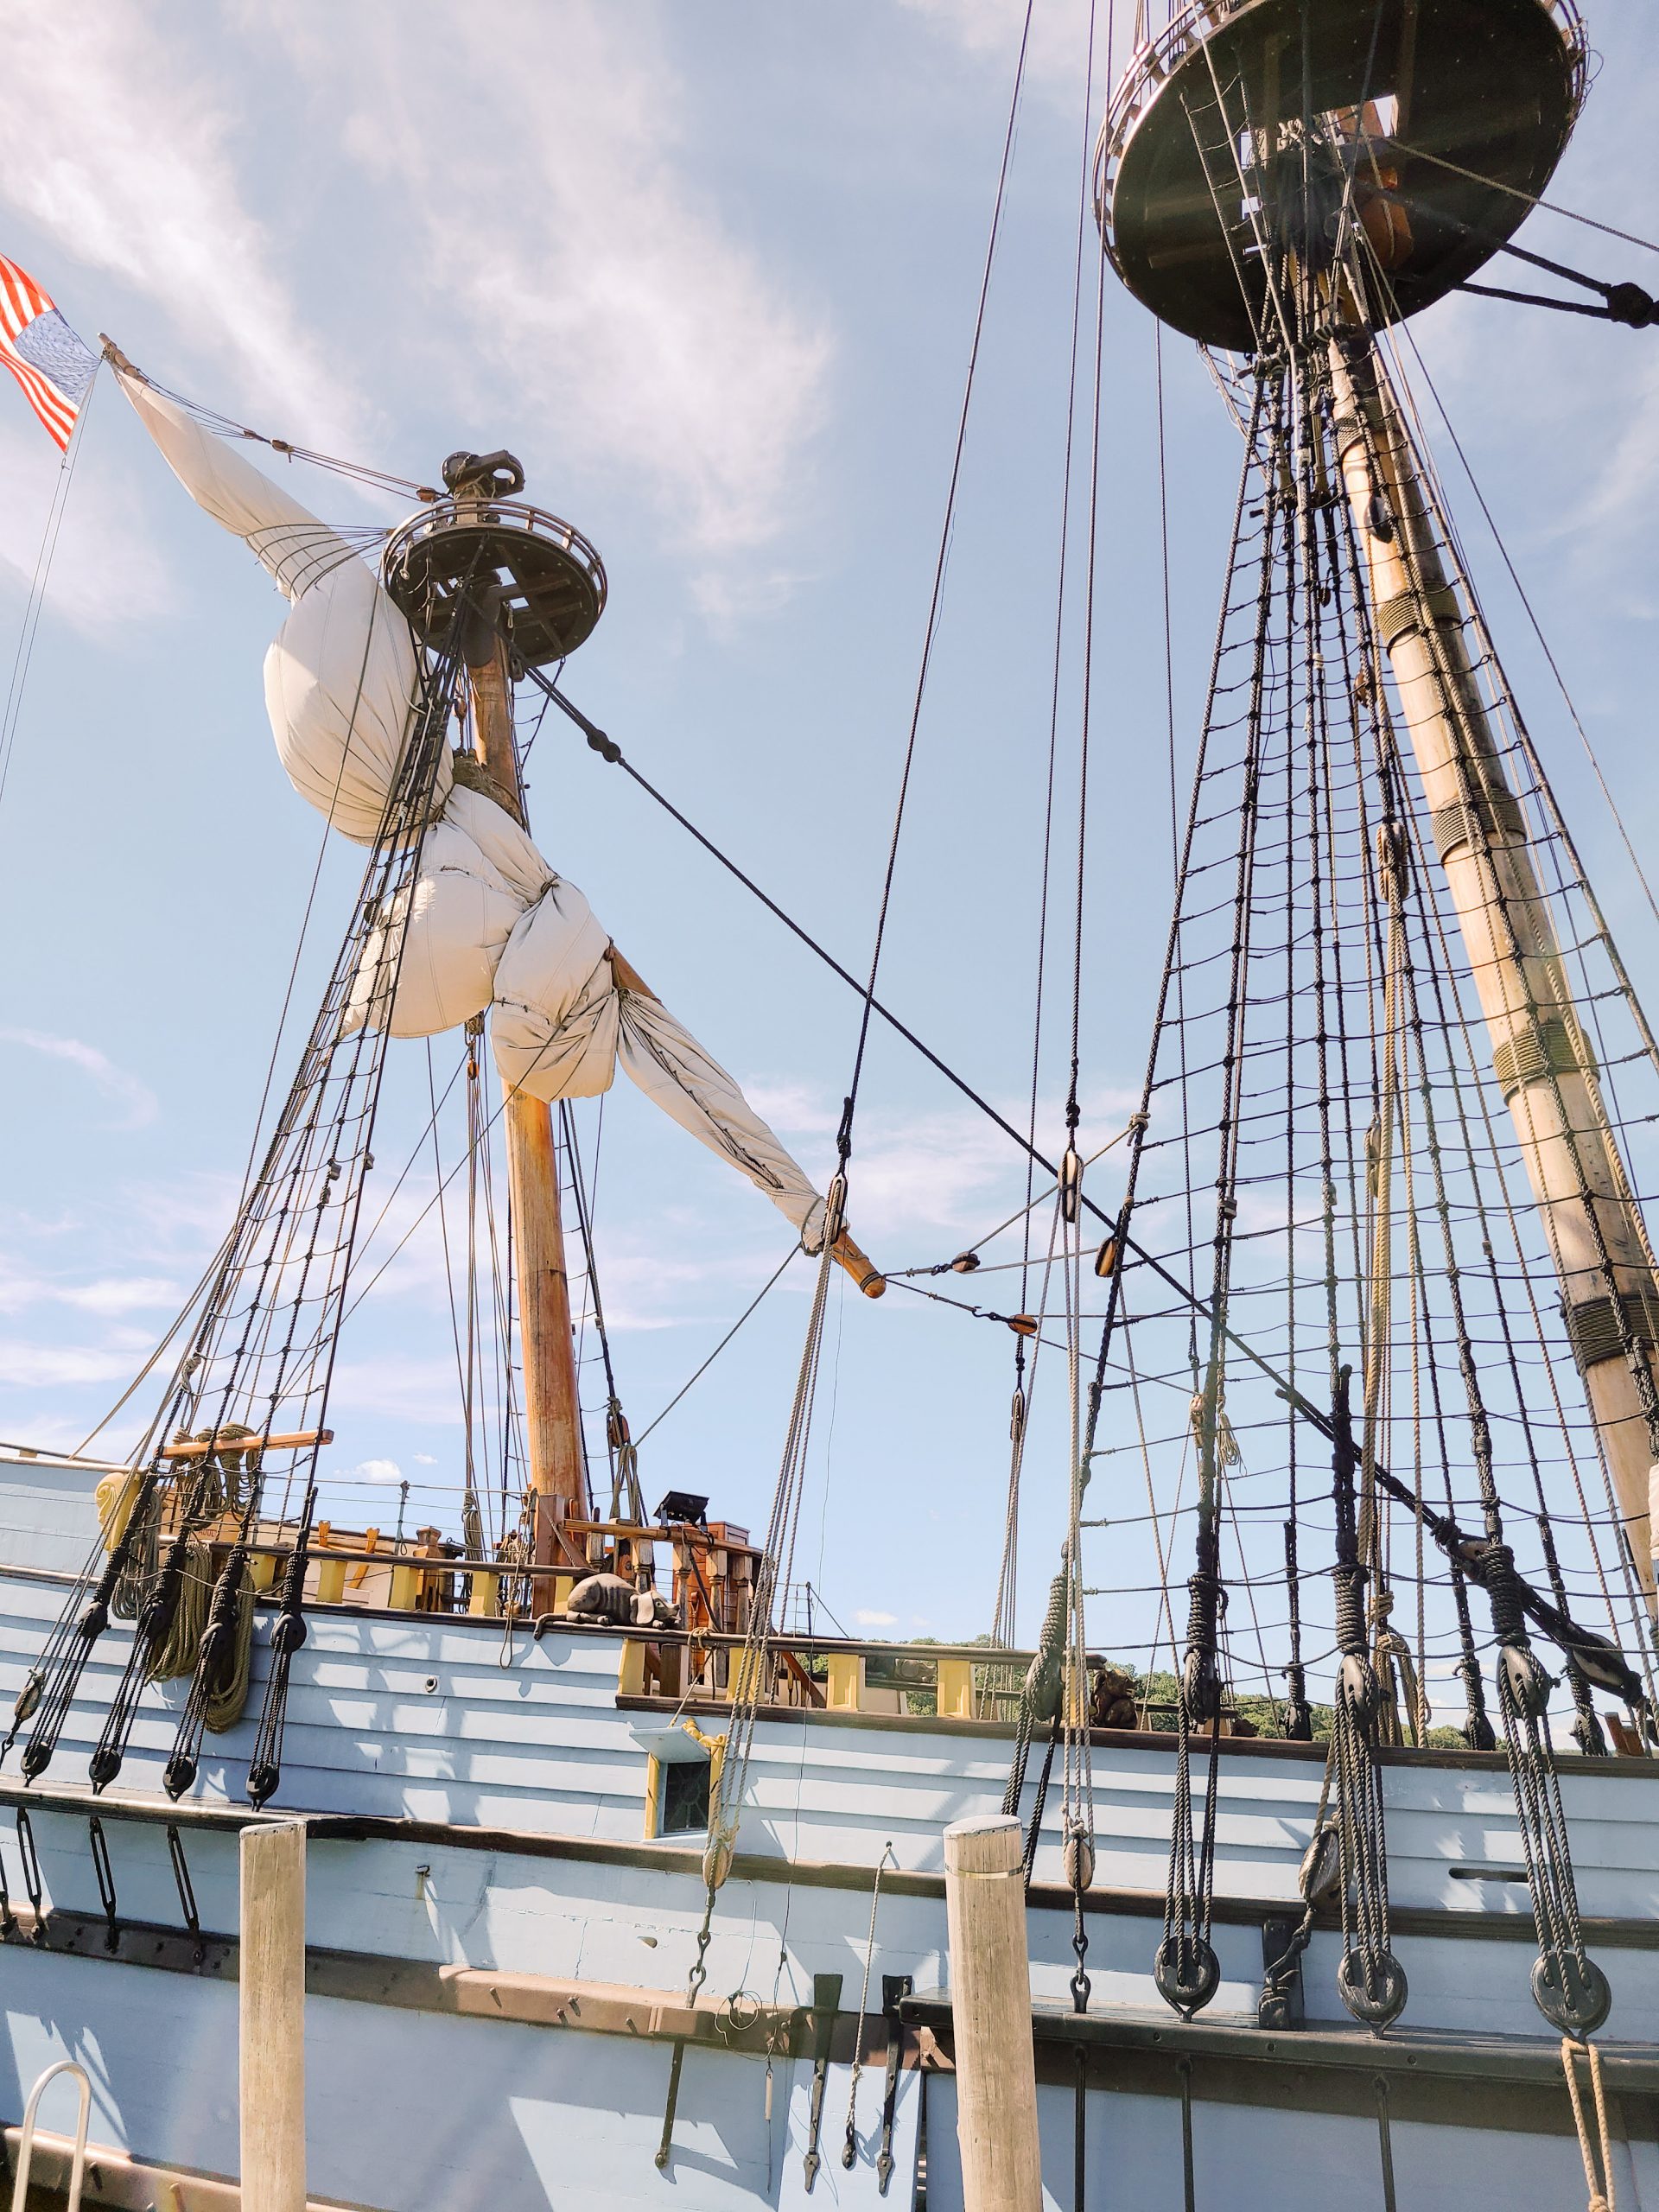 A photo of a pirate ship replica at the Seaport Museum